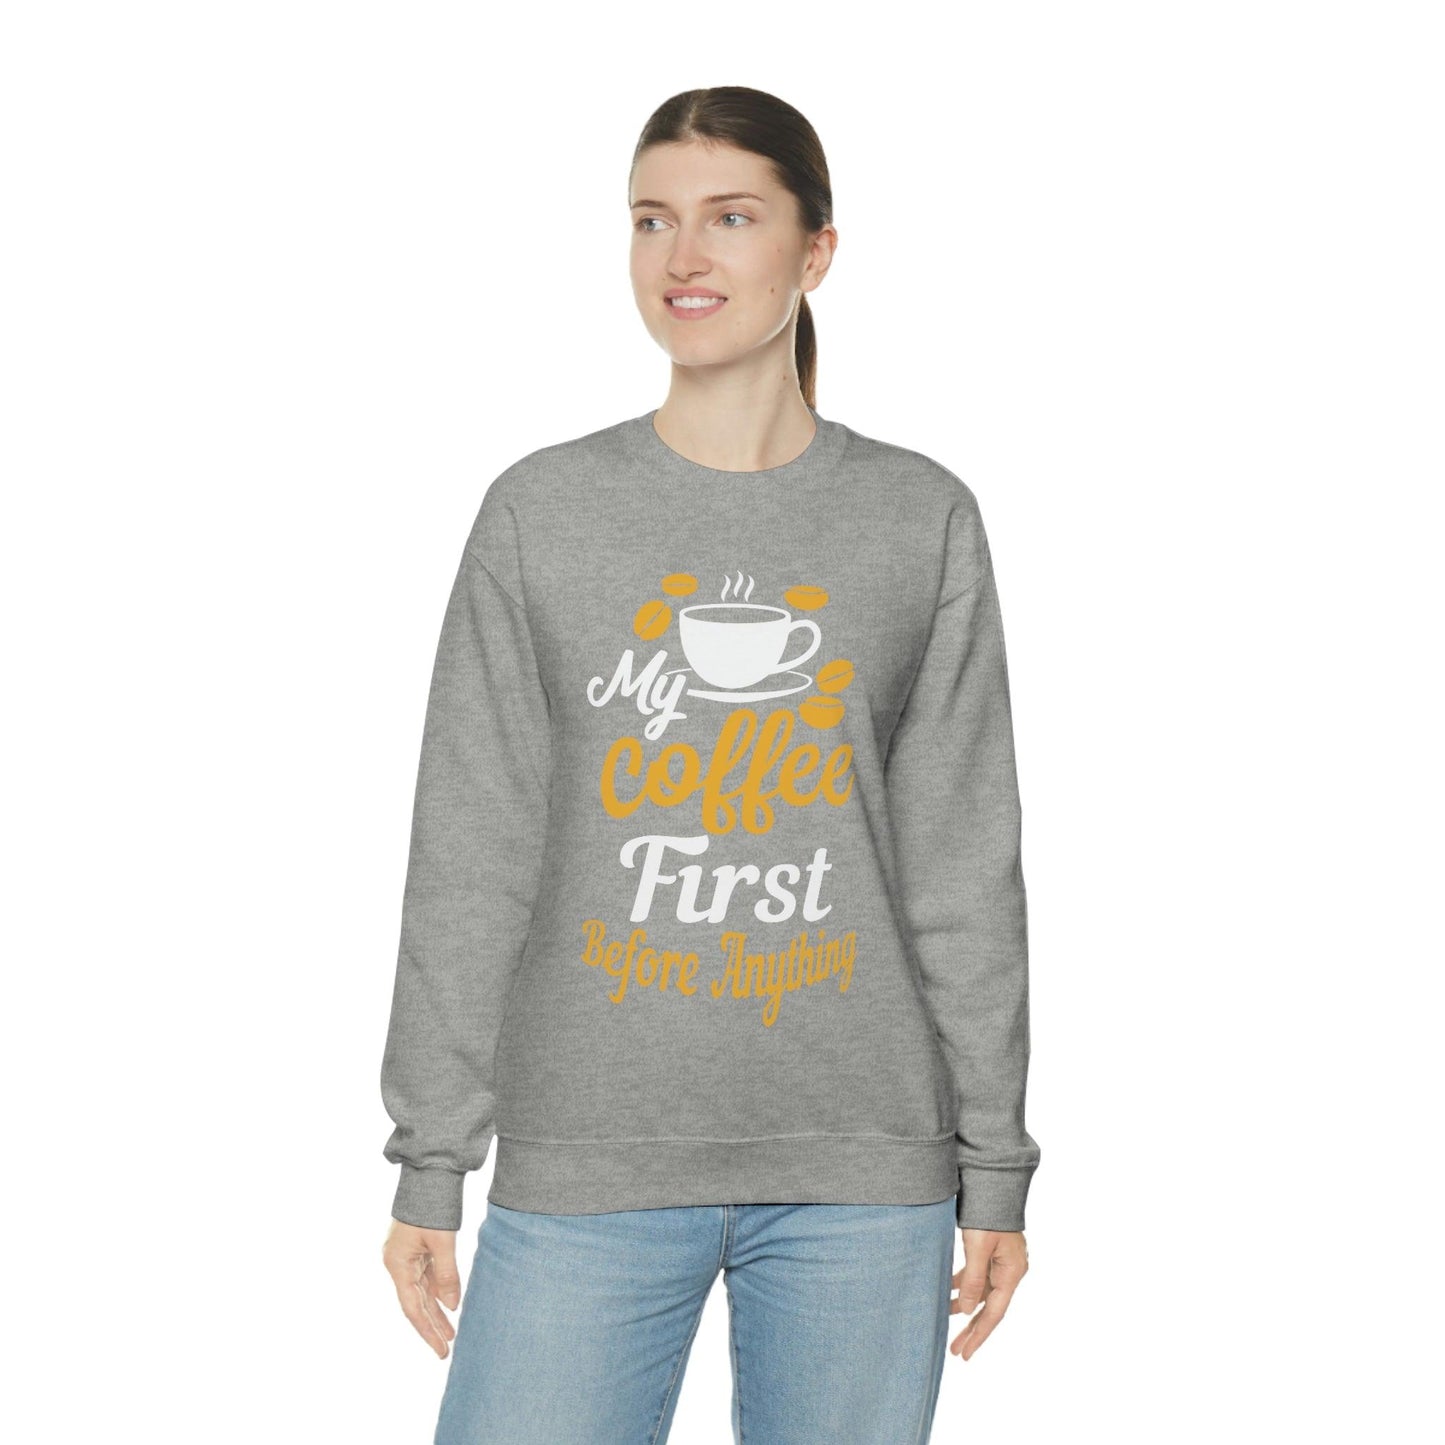 My Coffee First before anything Sweatshirt